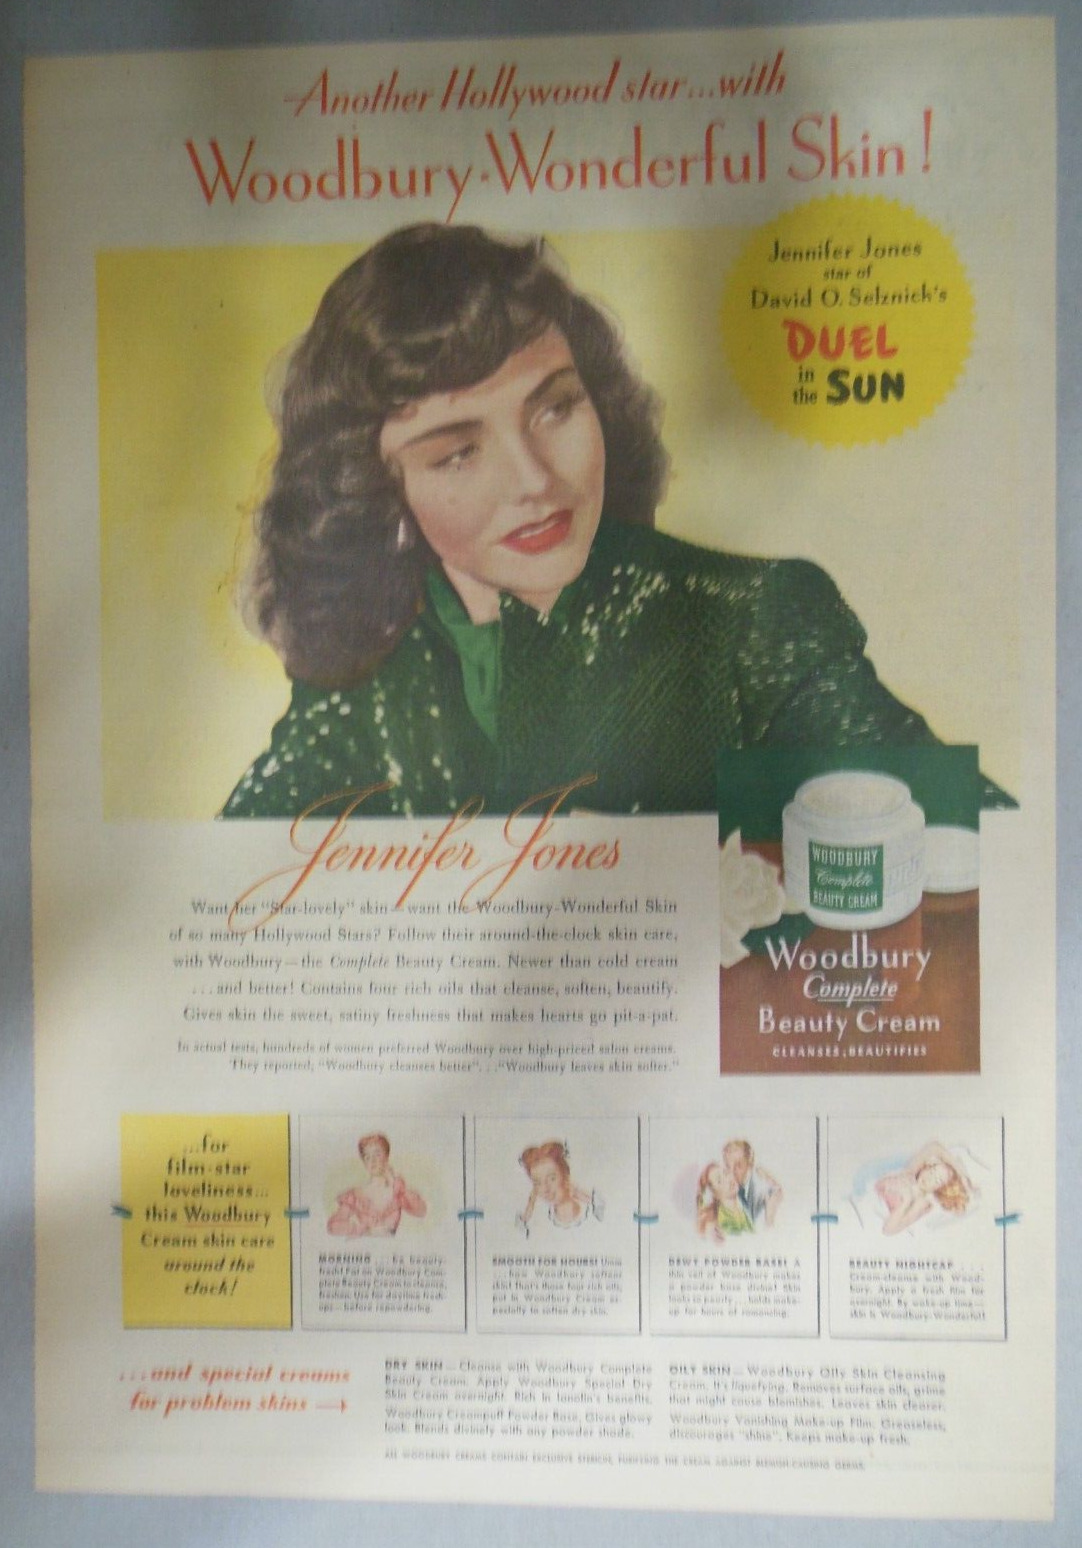 Woodbury Cream Ad: Featuring Jennifer Jones from 1940's Size:  11  x 15 inches